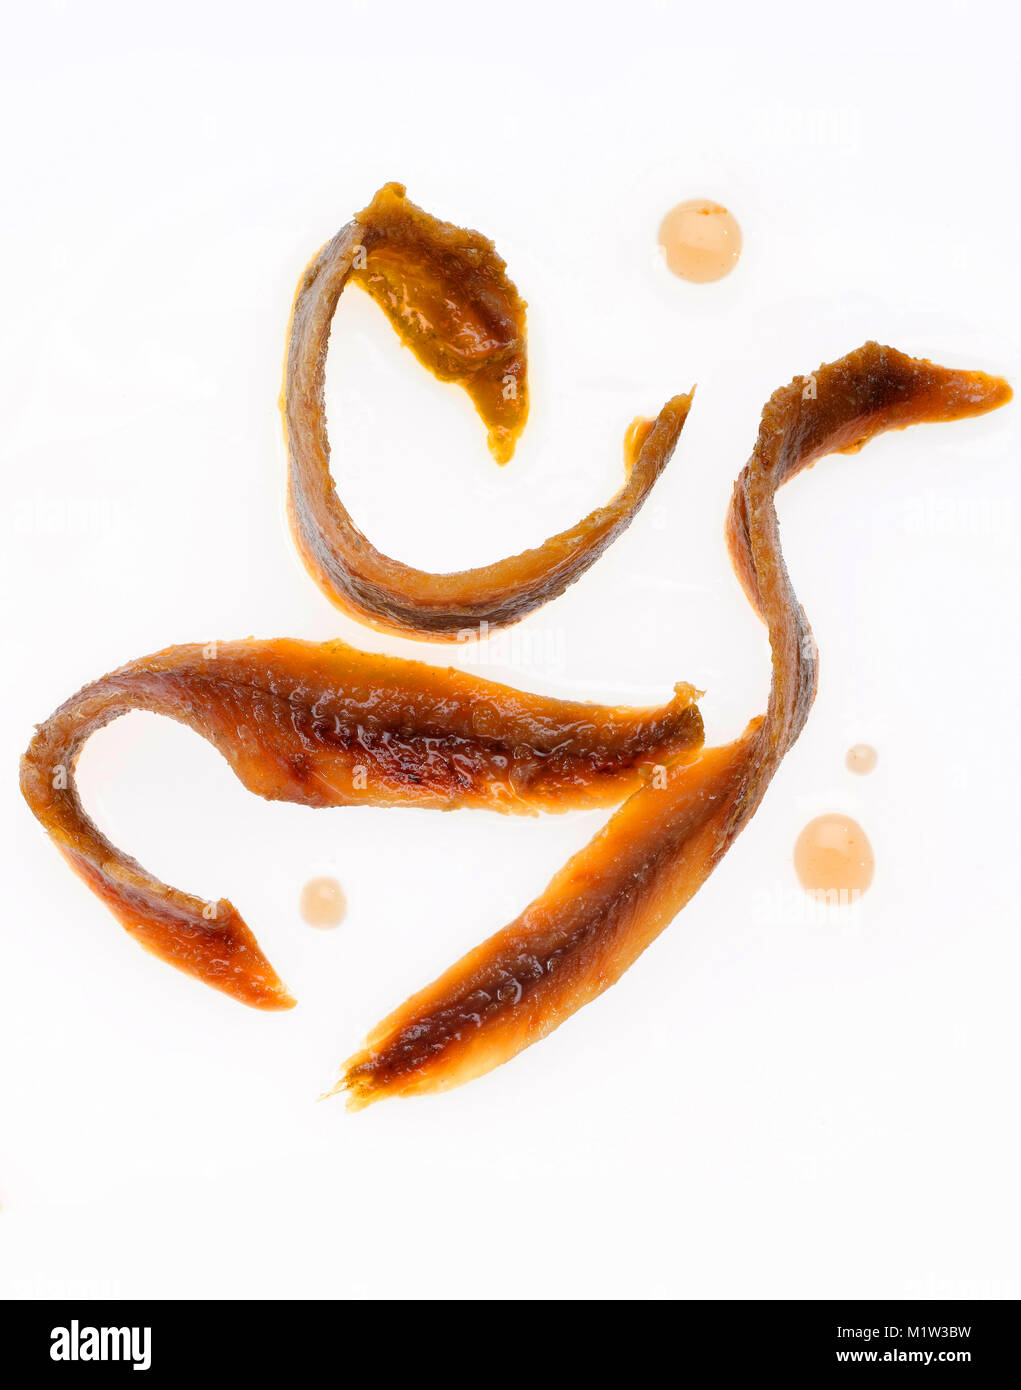 High Angle View of Three Anchovy Fillets with Drops of Oil Against White Background Stock Photo